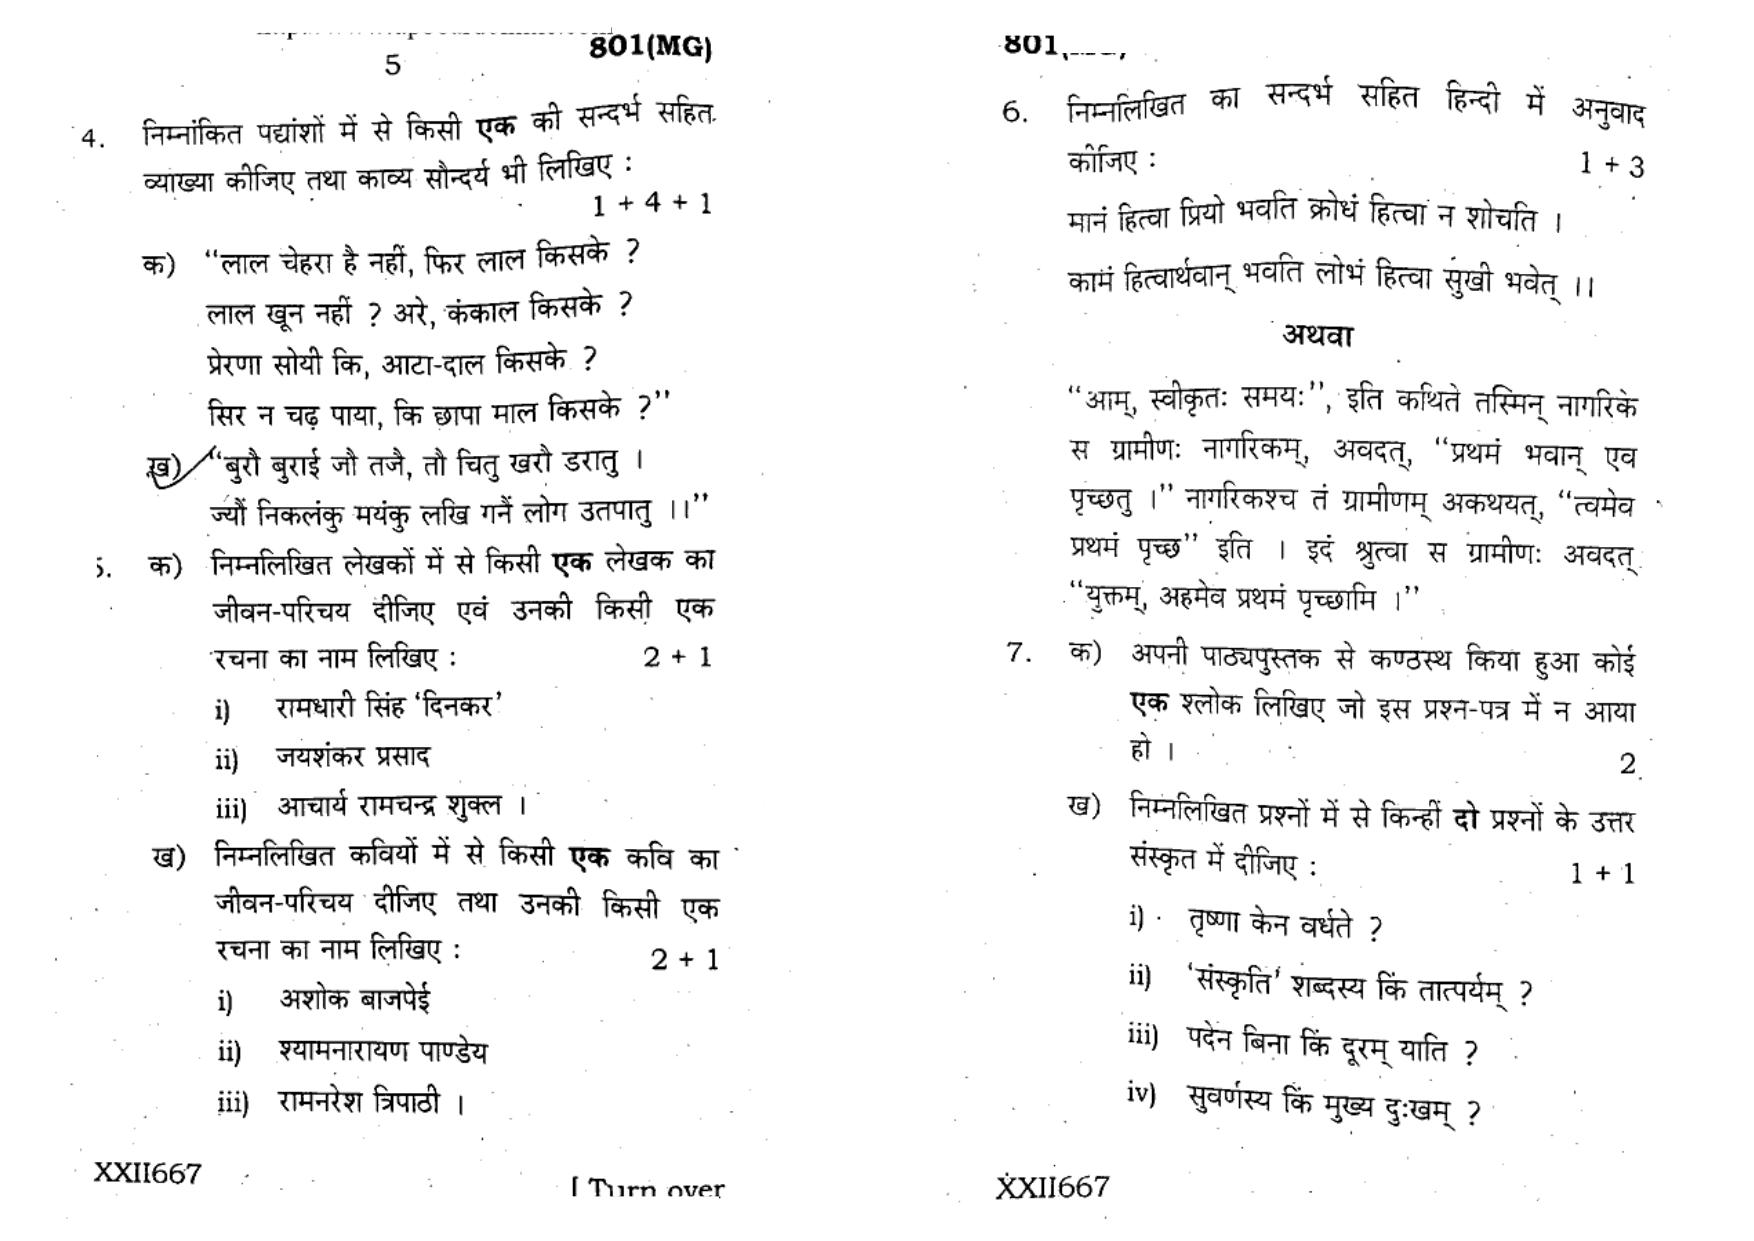 UP Board Previous Year Question Paper Class 10 Hindi (801 MG) – 2020 - Page 3